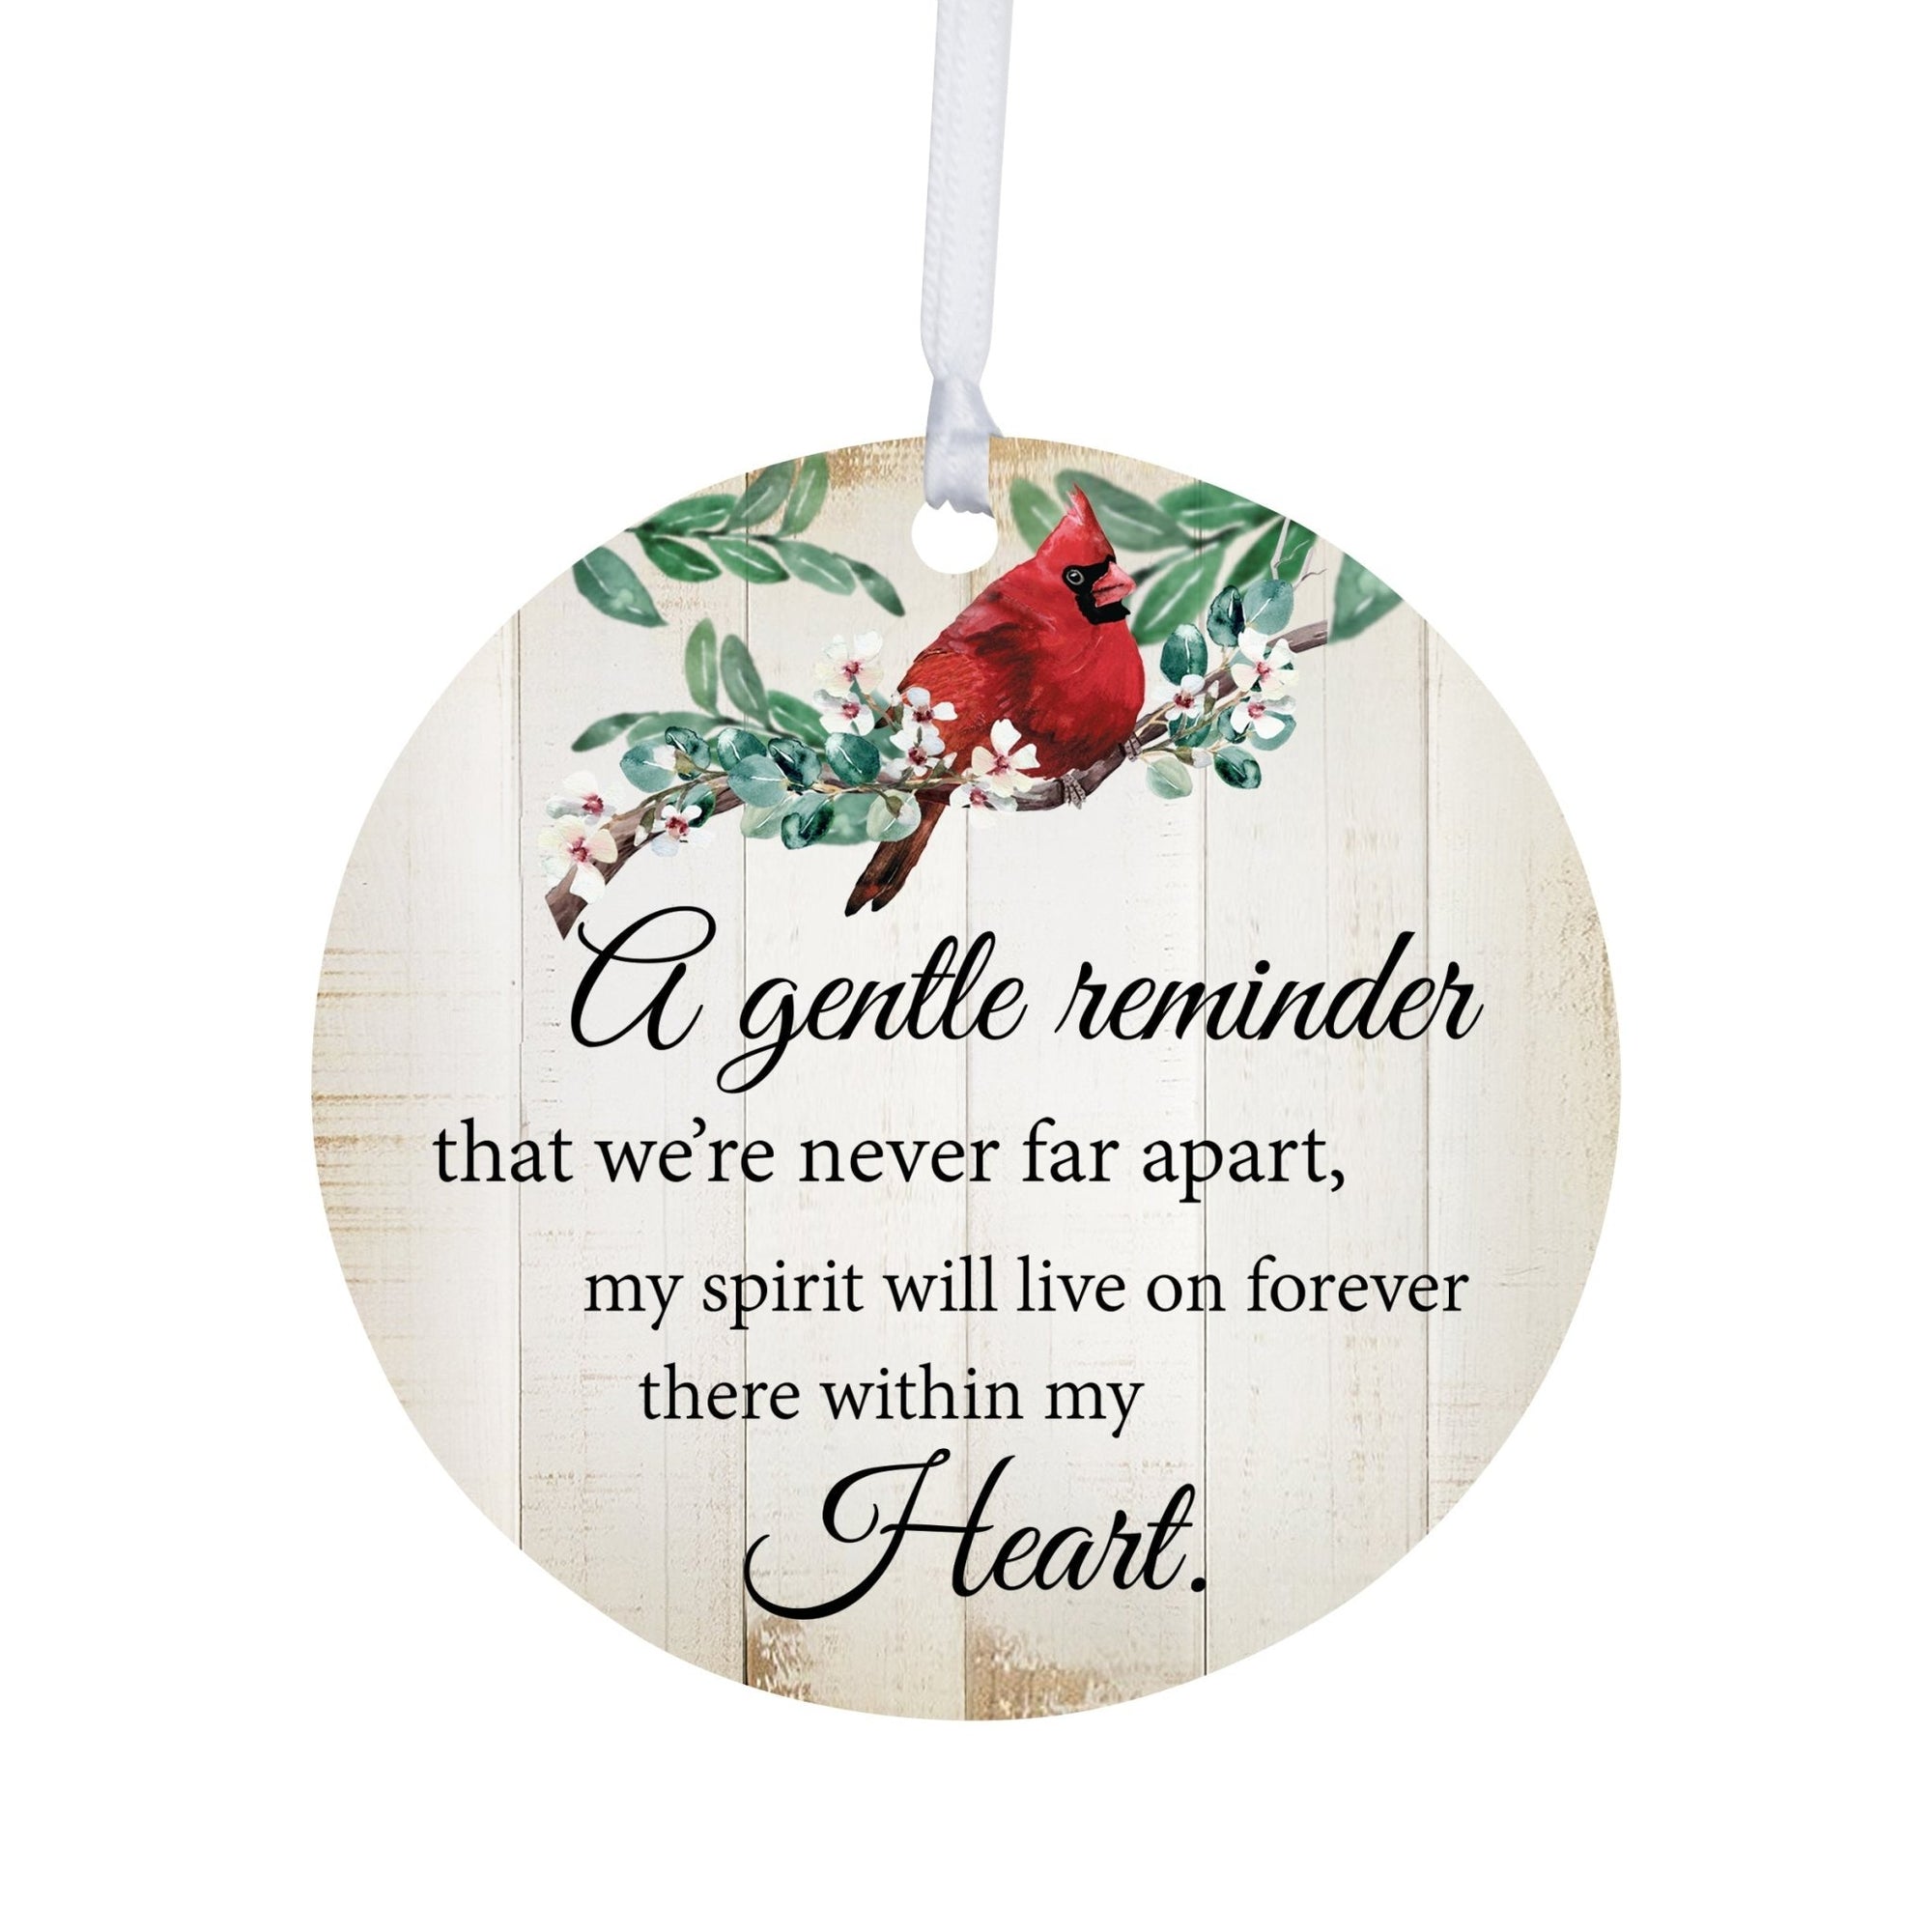 Round ornament gift memorial decorations for a heartfelt and thoughtful holiday tribute.